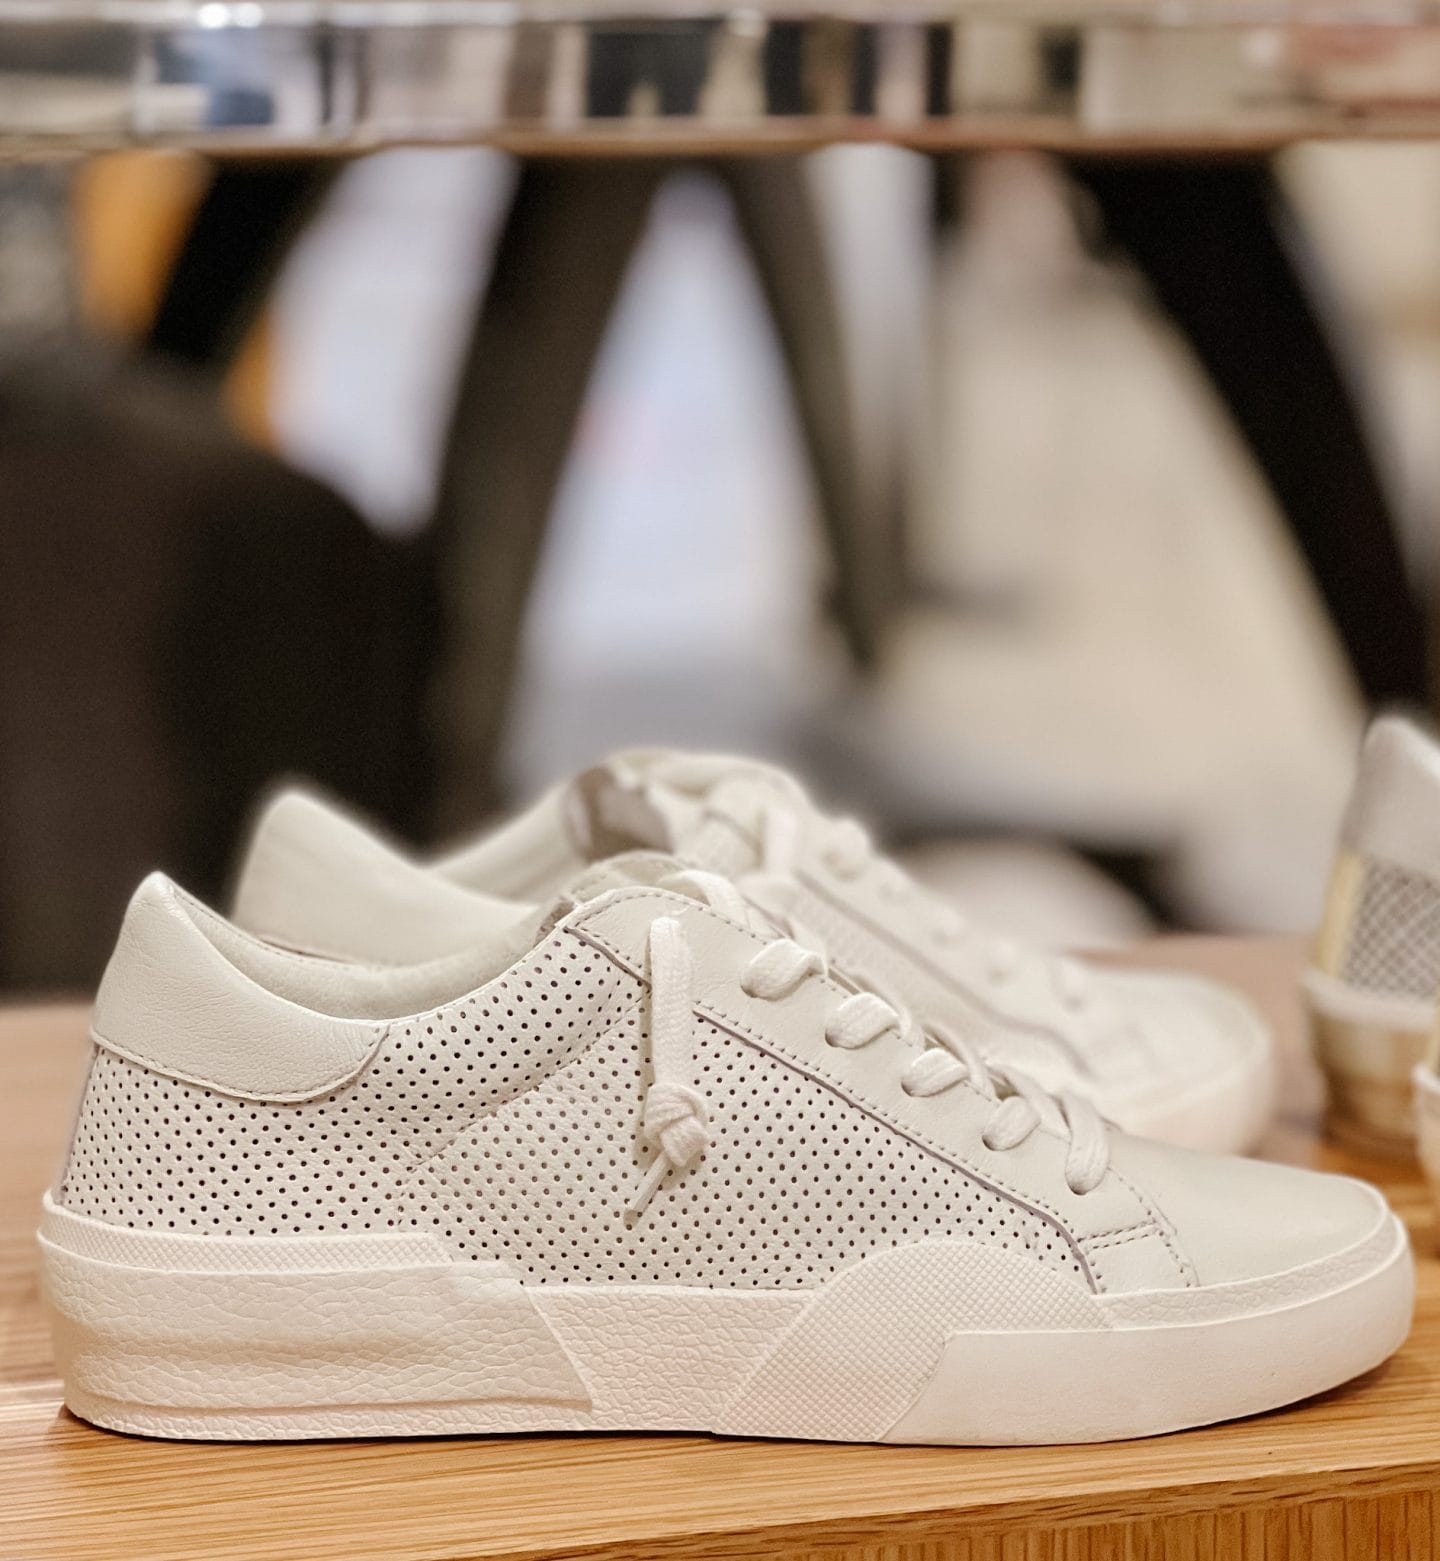 Nordstrom Anniversary Sale, dolce vita sneakers, white sneakers, fall sneakers